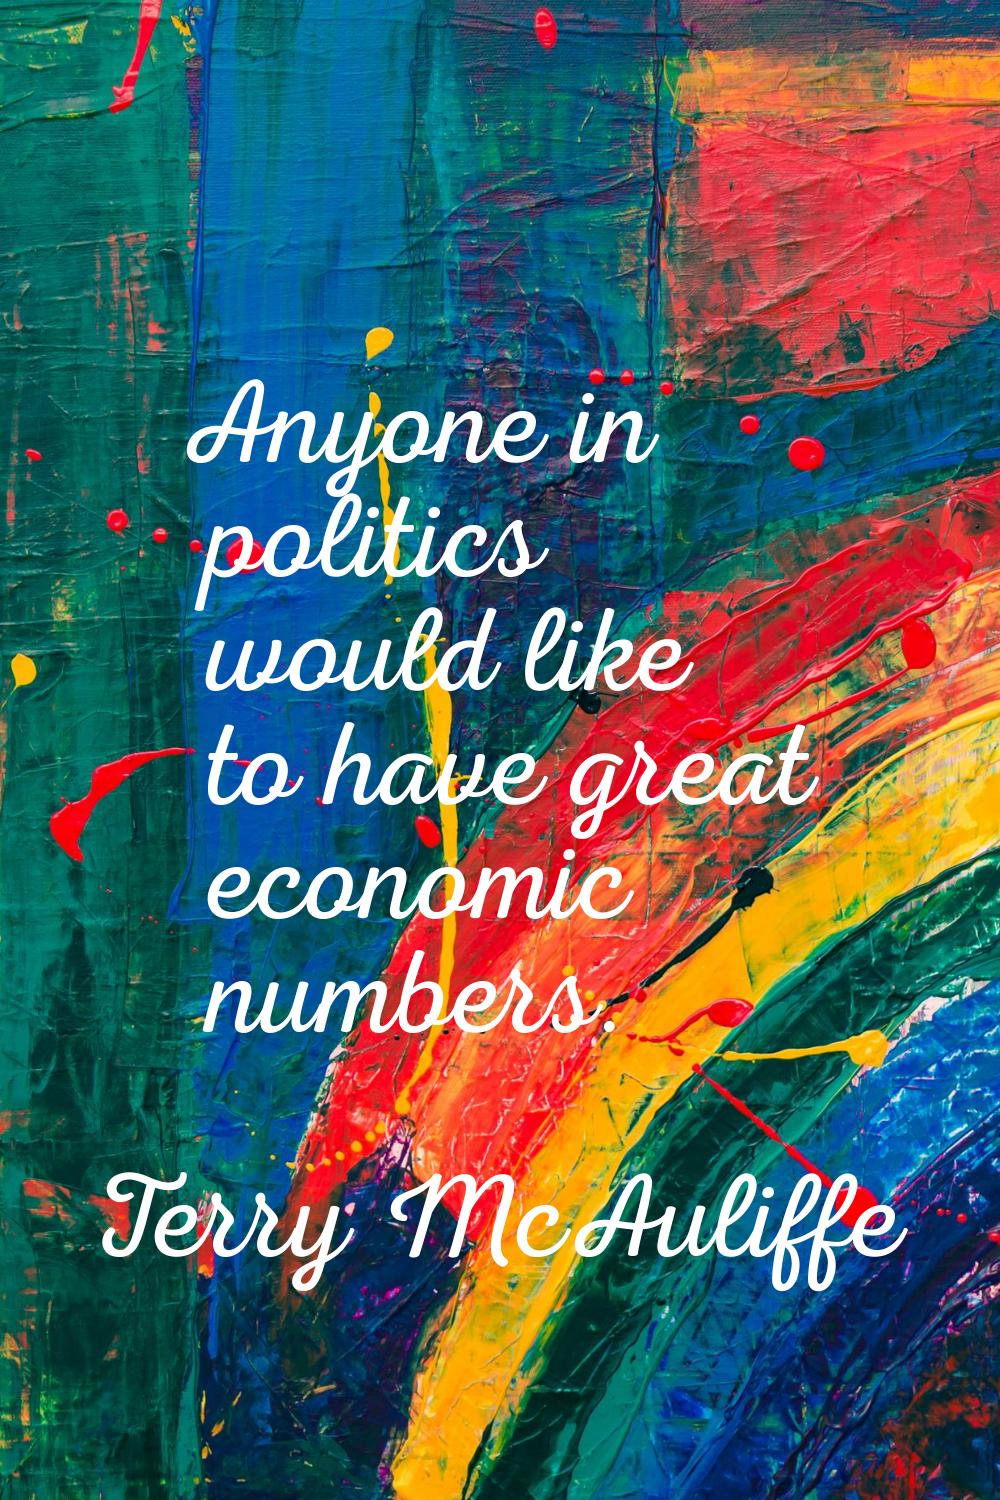 Anyone in politics would like to have great economic numbers.